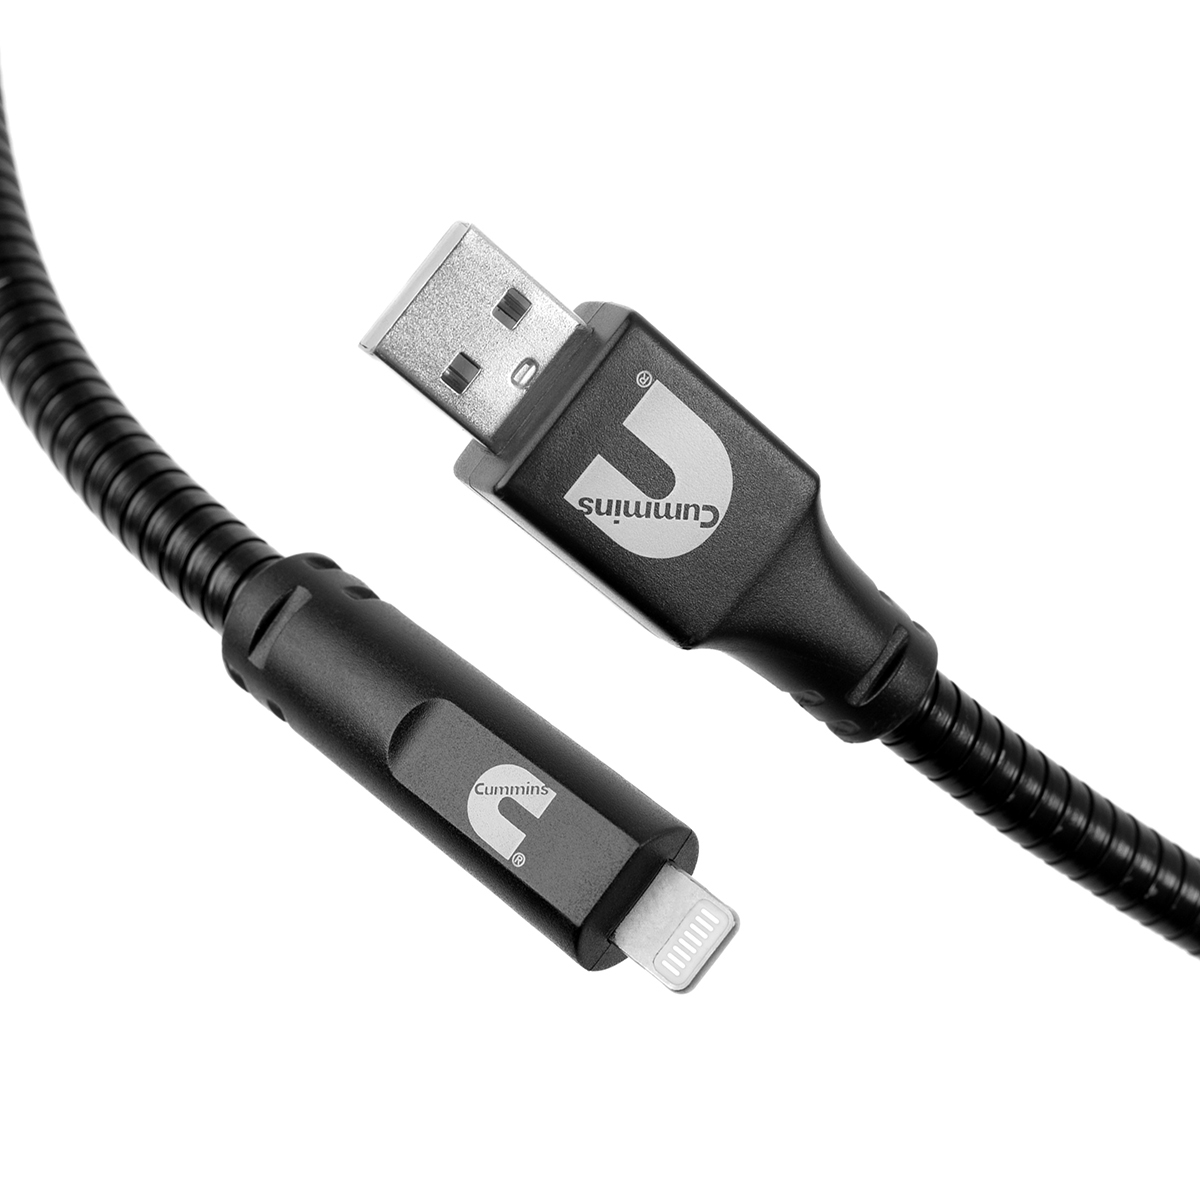 Cummins Lightning to USB A Charging Cable CMN4700 for iPhone MFi Certified Plus Organizer 4ft - Black